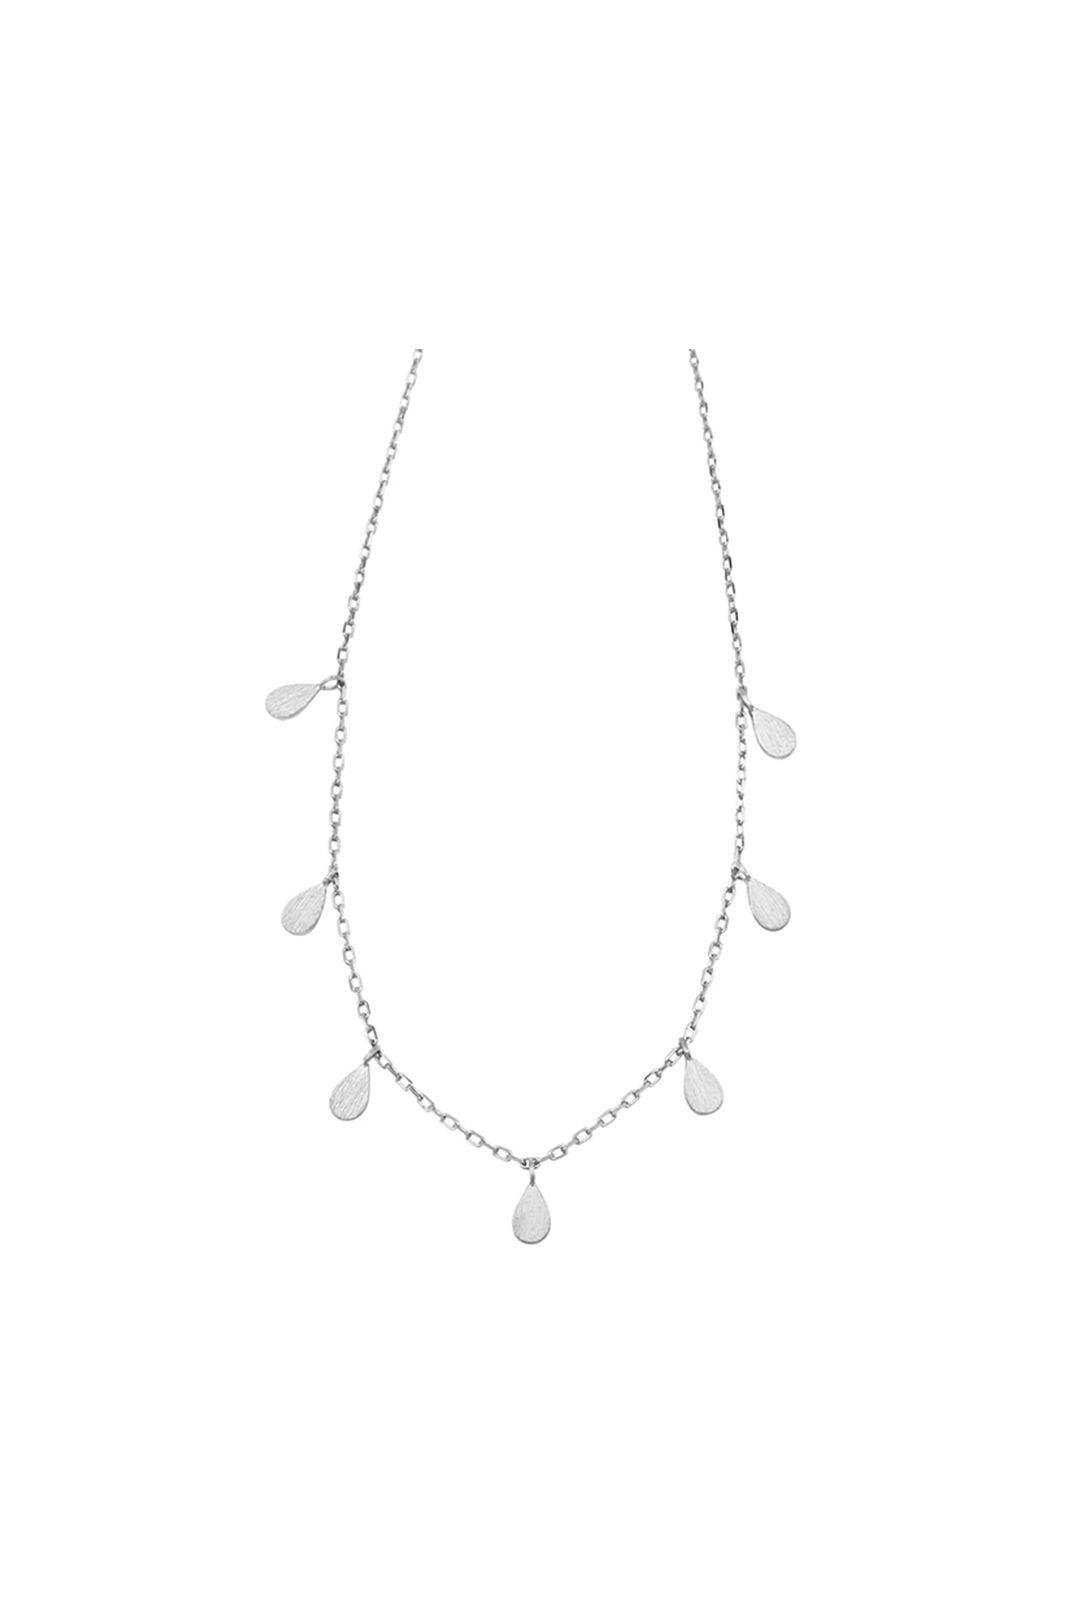 Jolie and Deen - Teardrop Necklace - Silver - Ghost Front